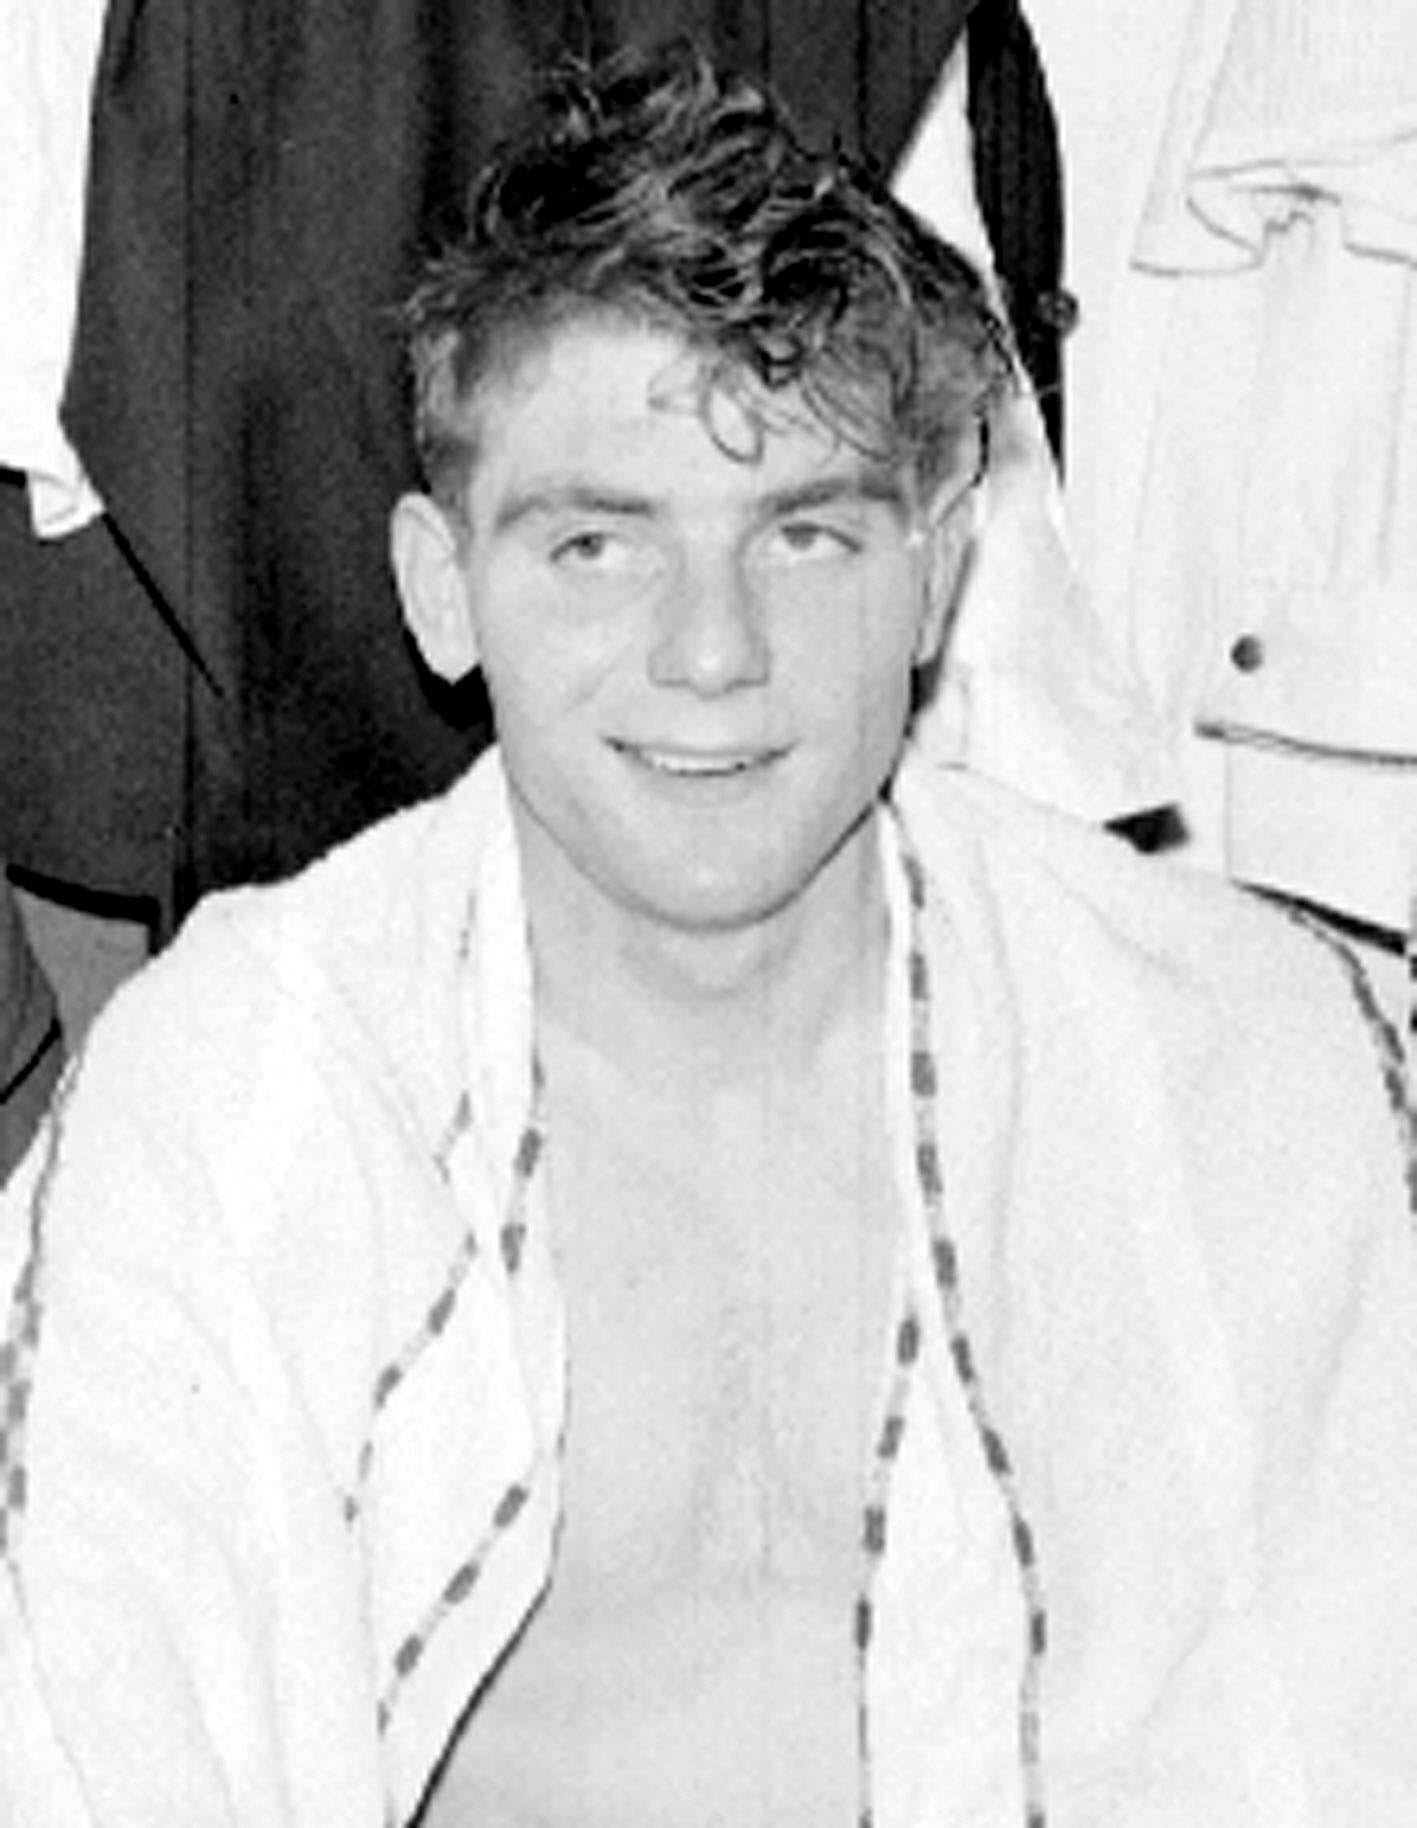 Manchester United player Duncan Edwards, who died after a plane crashed at Munich airport following a European Cup match (PA)